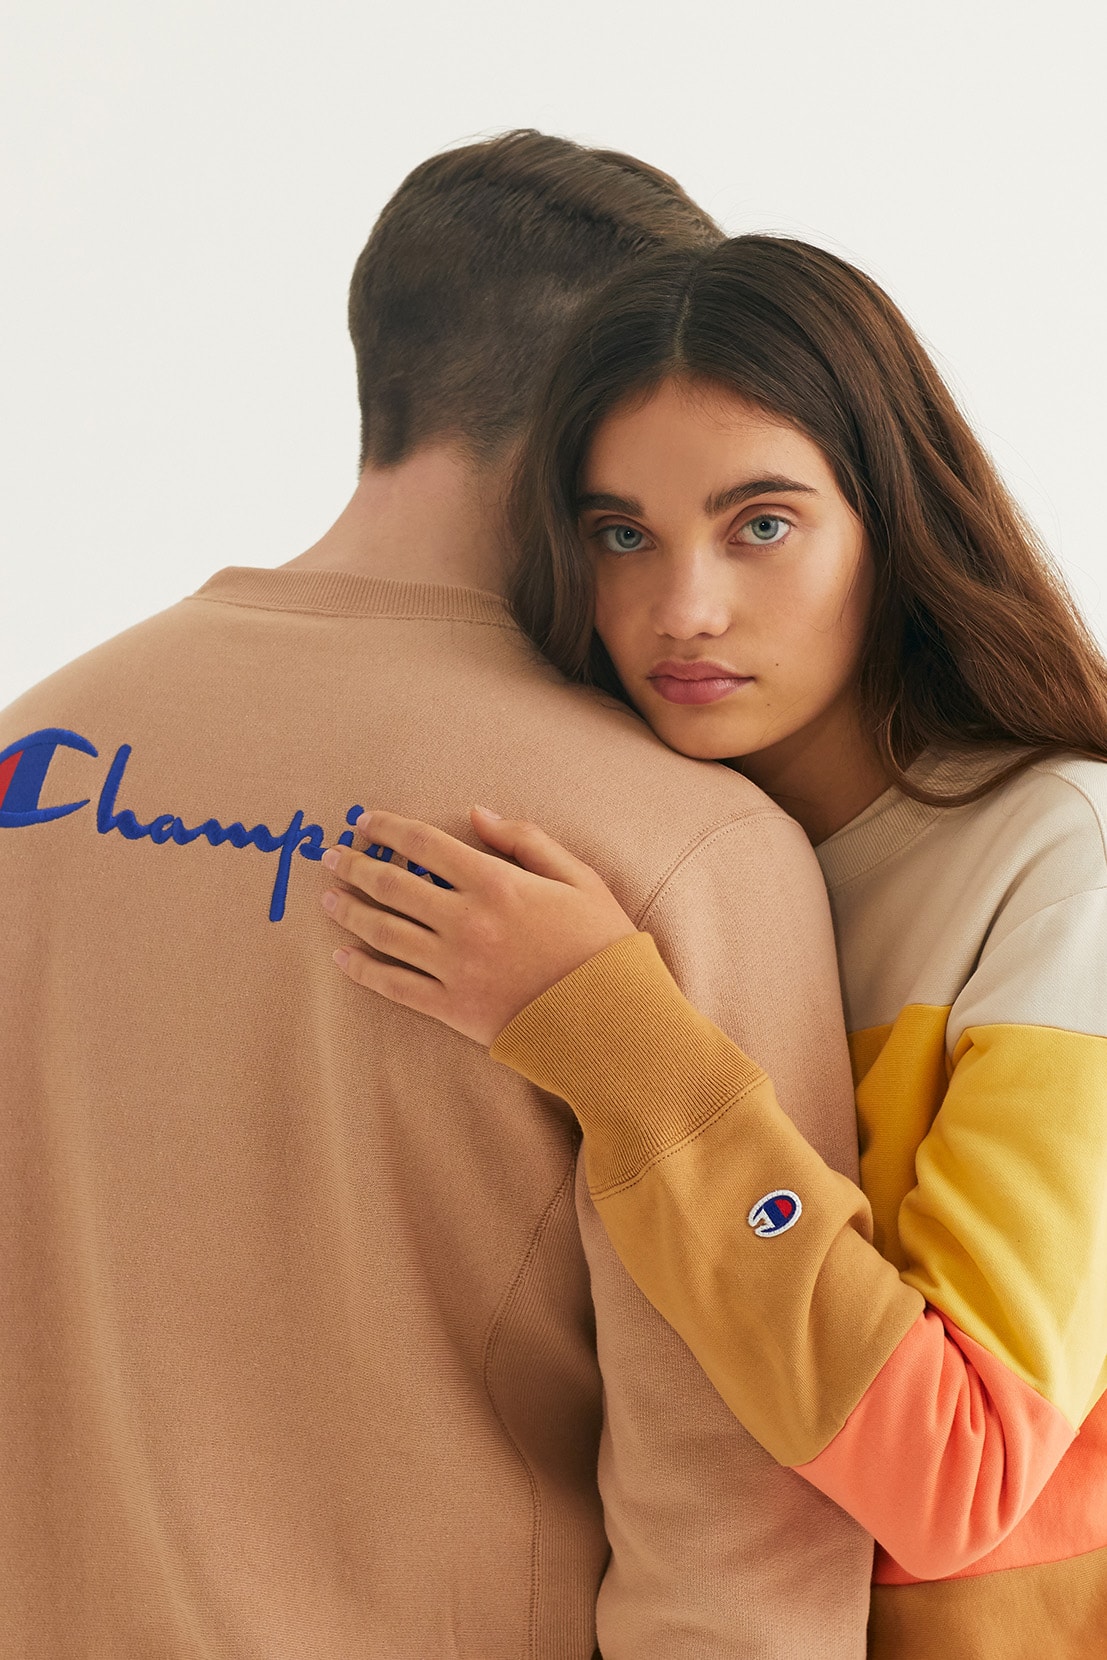 Champion Fall/Winter 2018 Collection First Look Fashion Cop Purchase Buy Soon Jackets Tracksuit Bottoms Half-Zips T-Shirts Hoodies Trousers